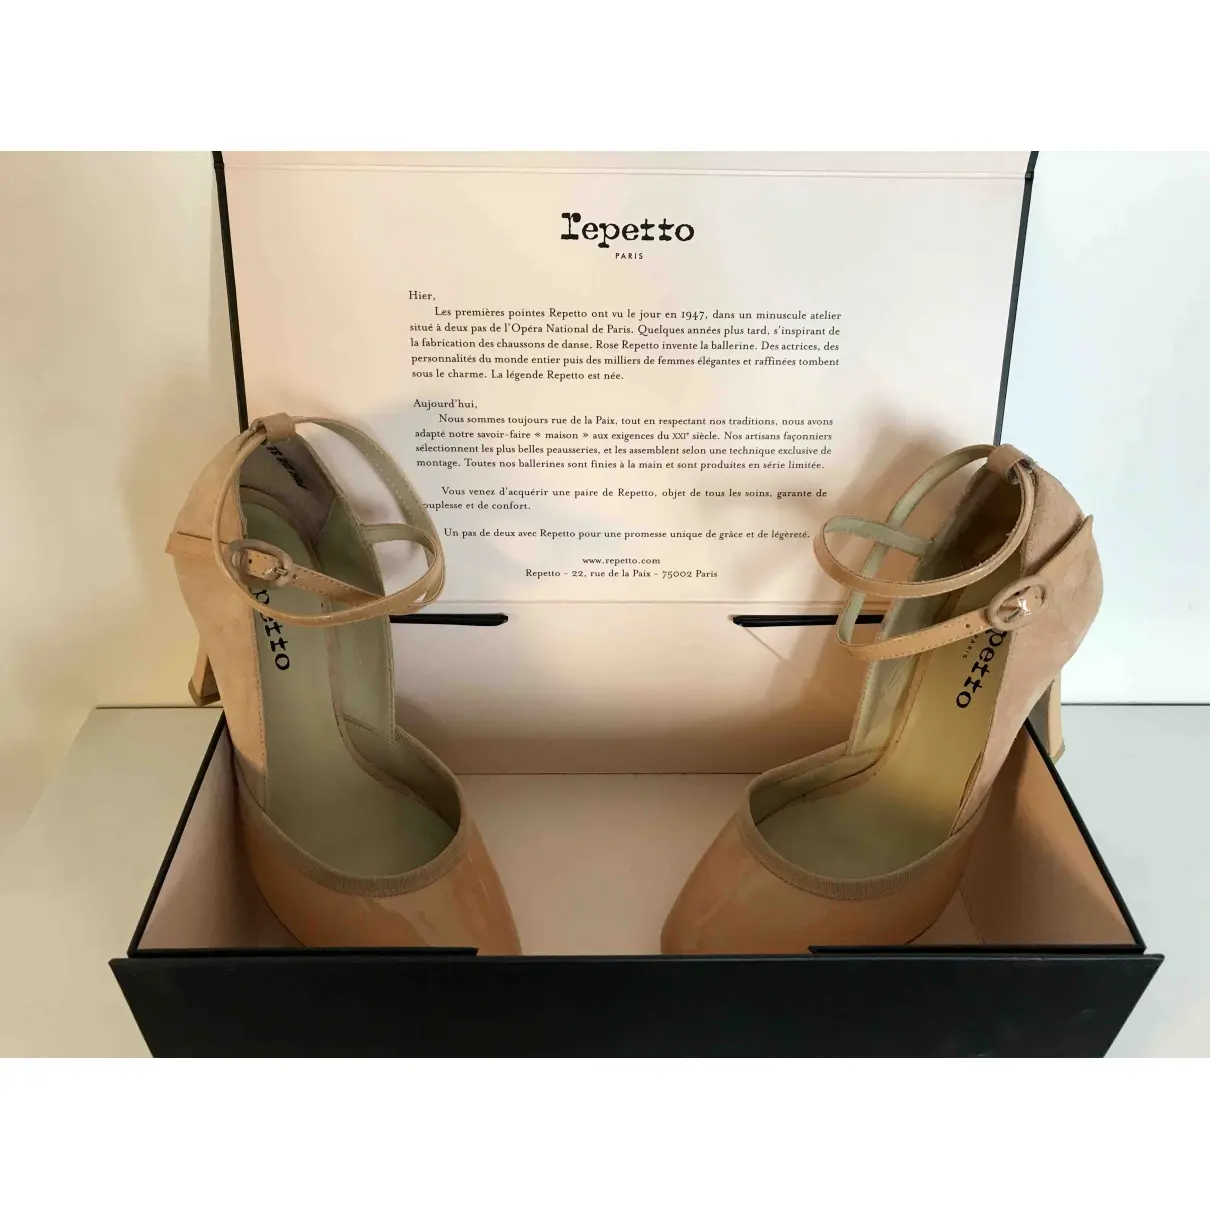 Buy Repetto Patent leather heels online